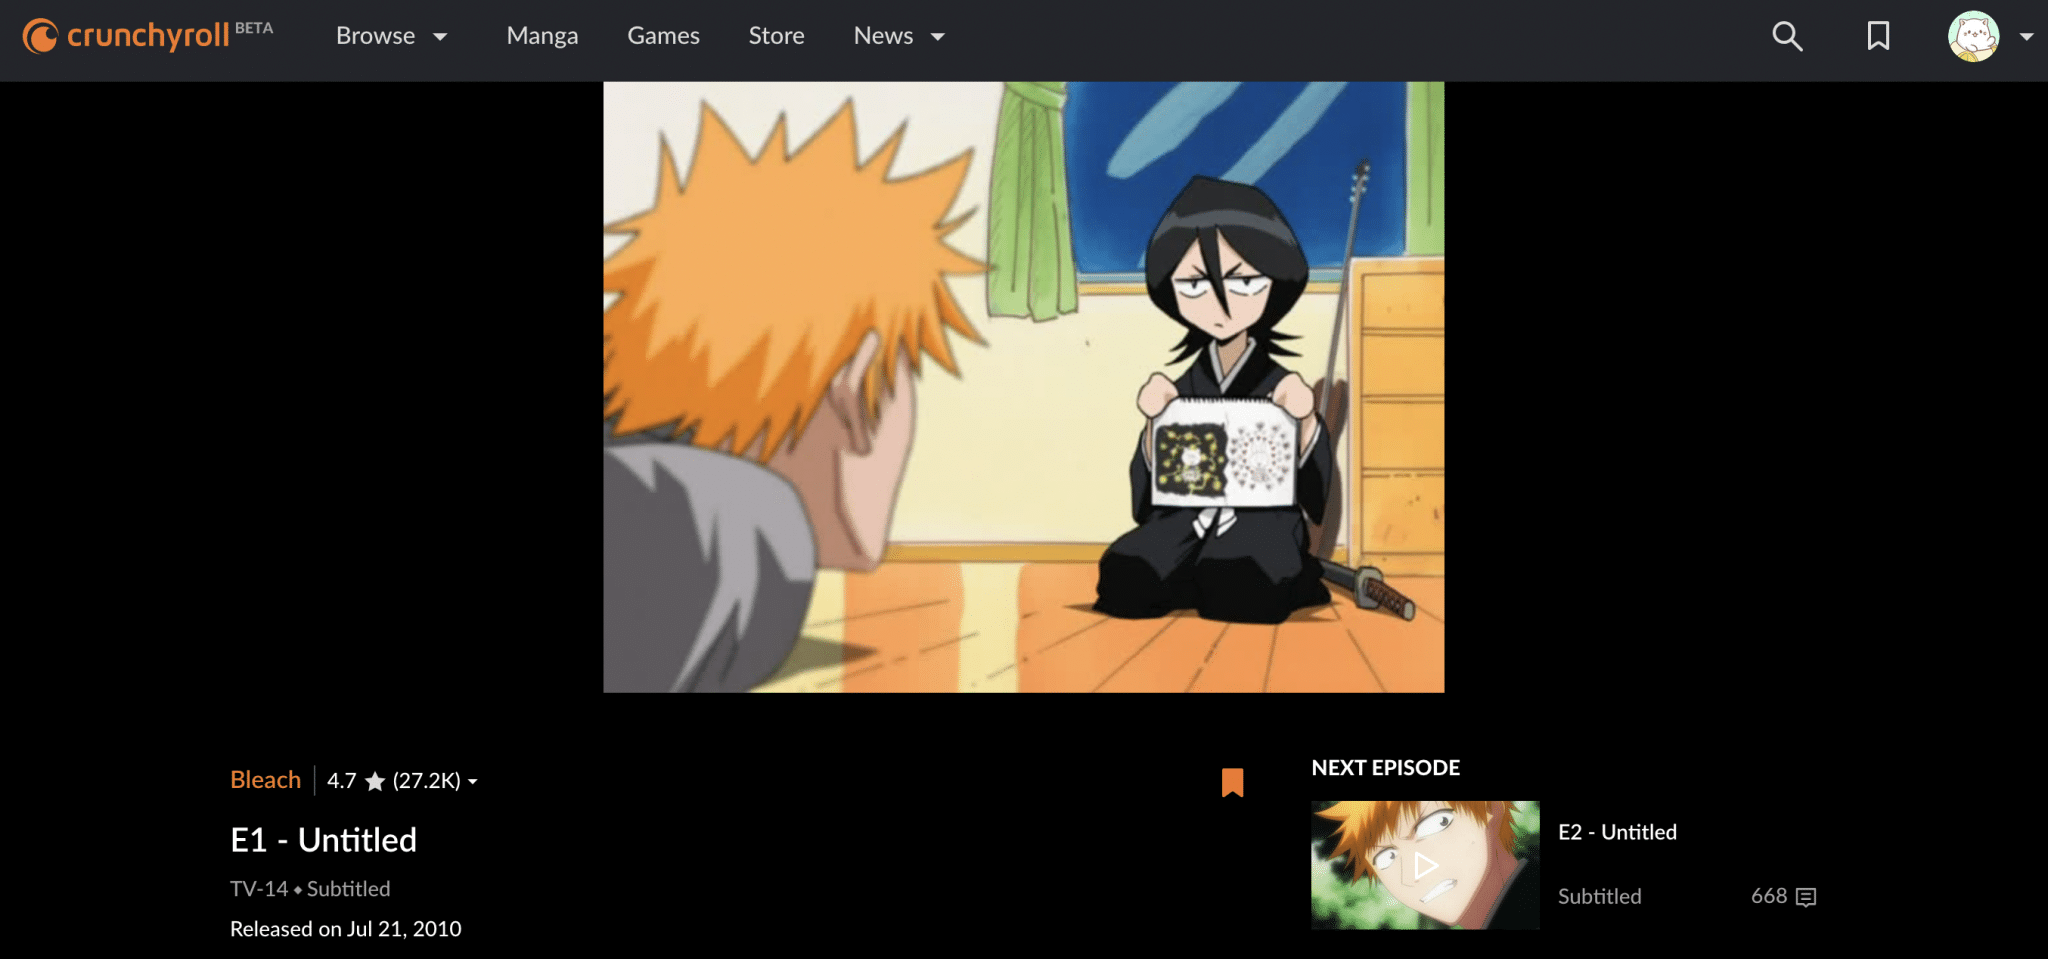 5 Best Places to Watch Bleach Online (Free and Paid Streaming Services) -